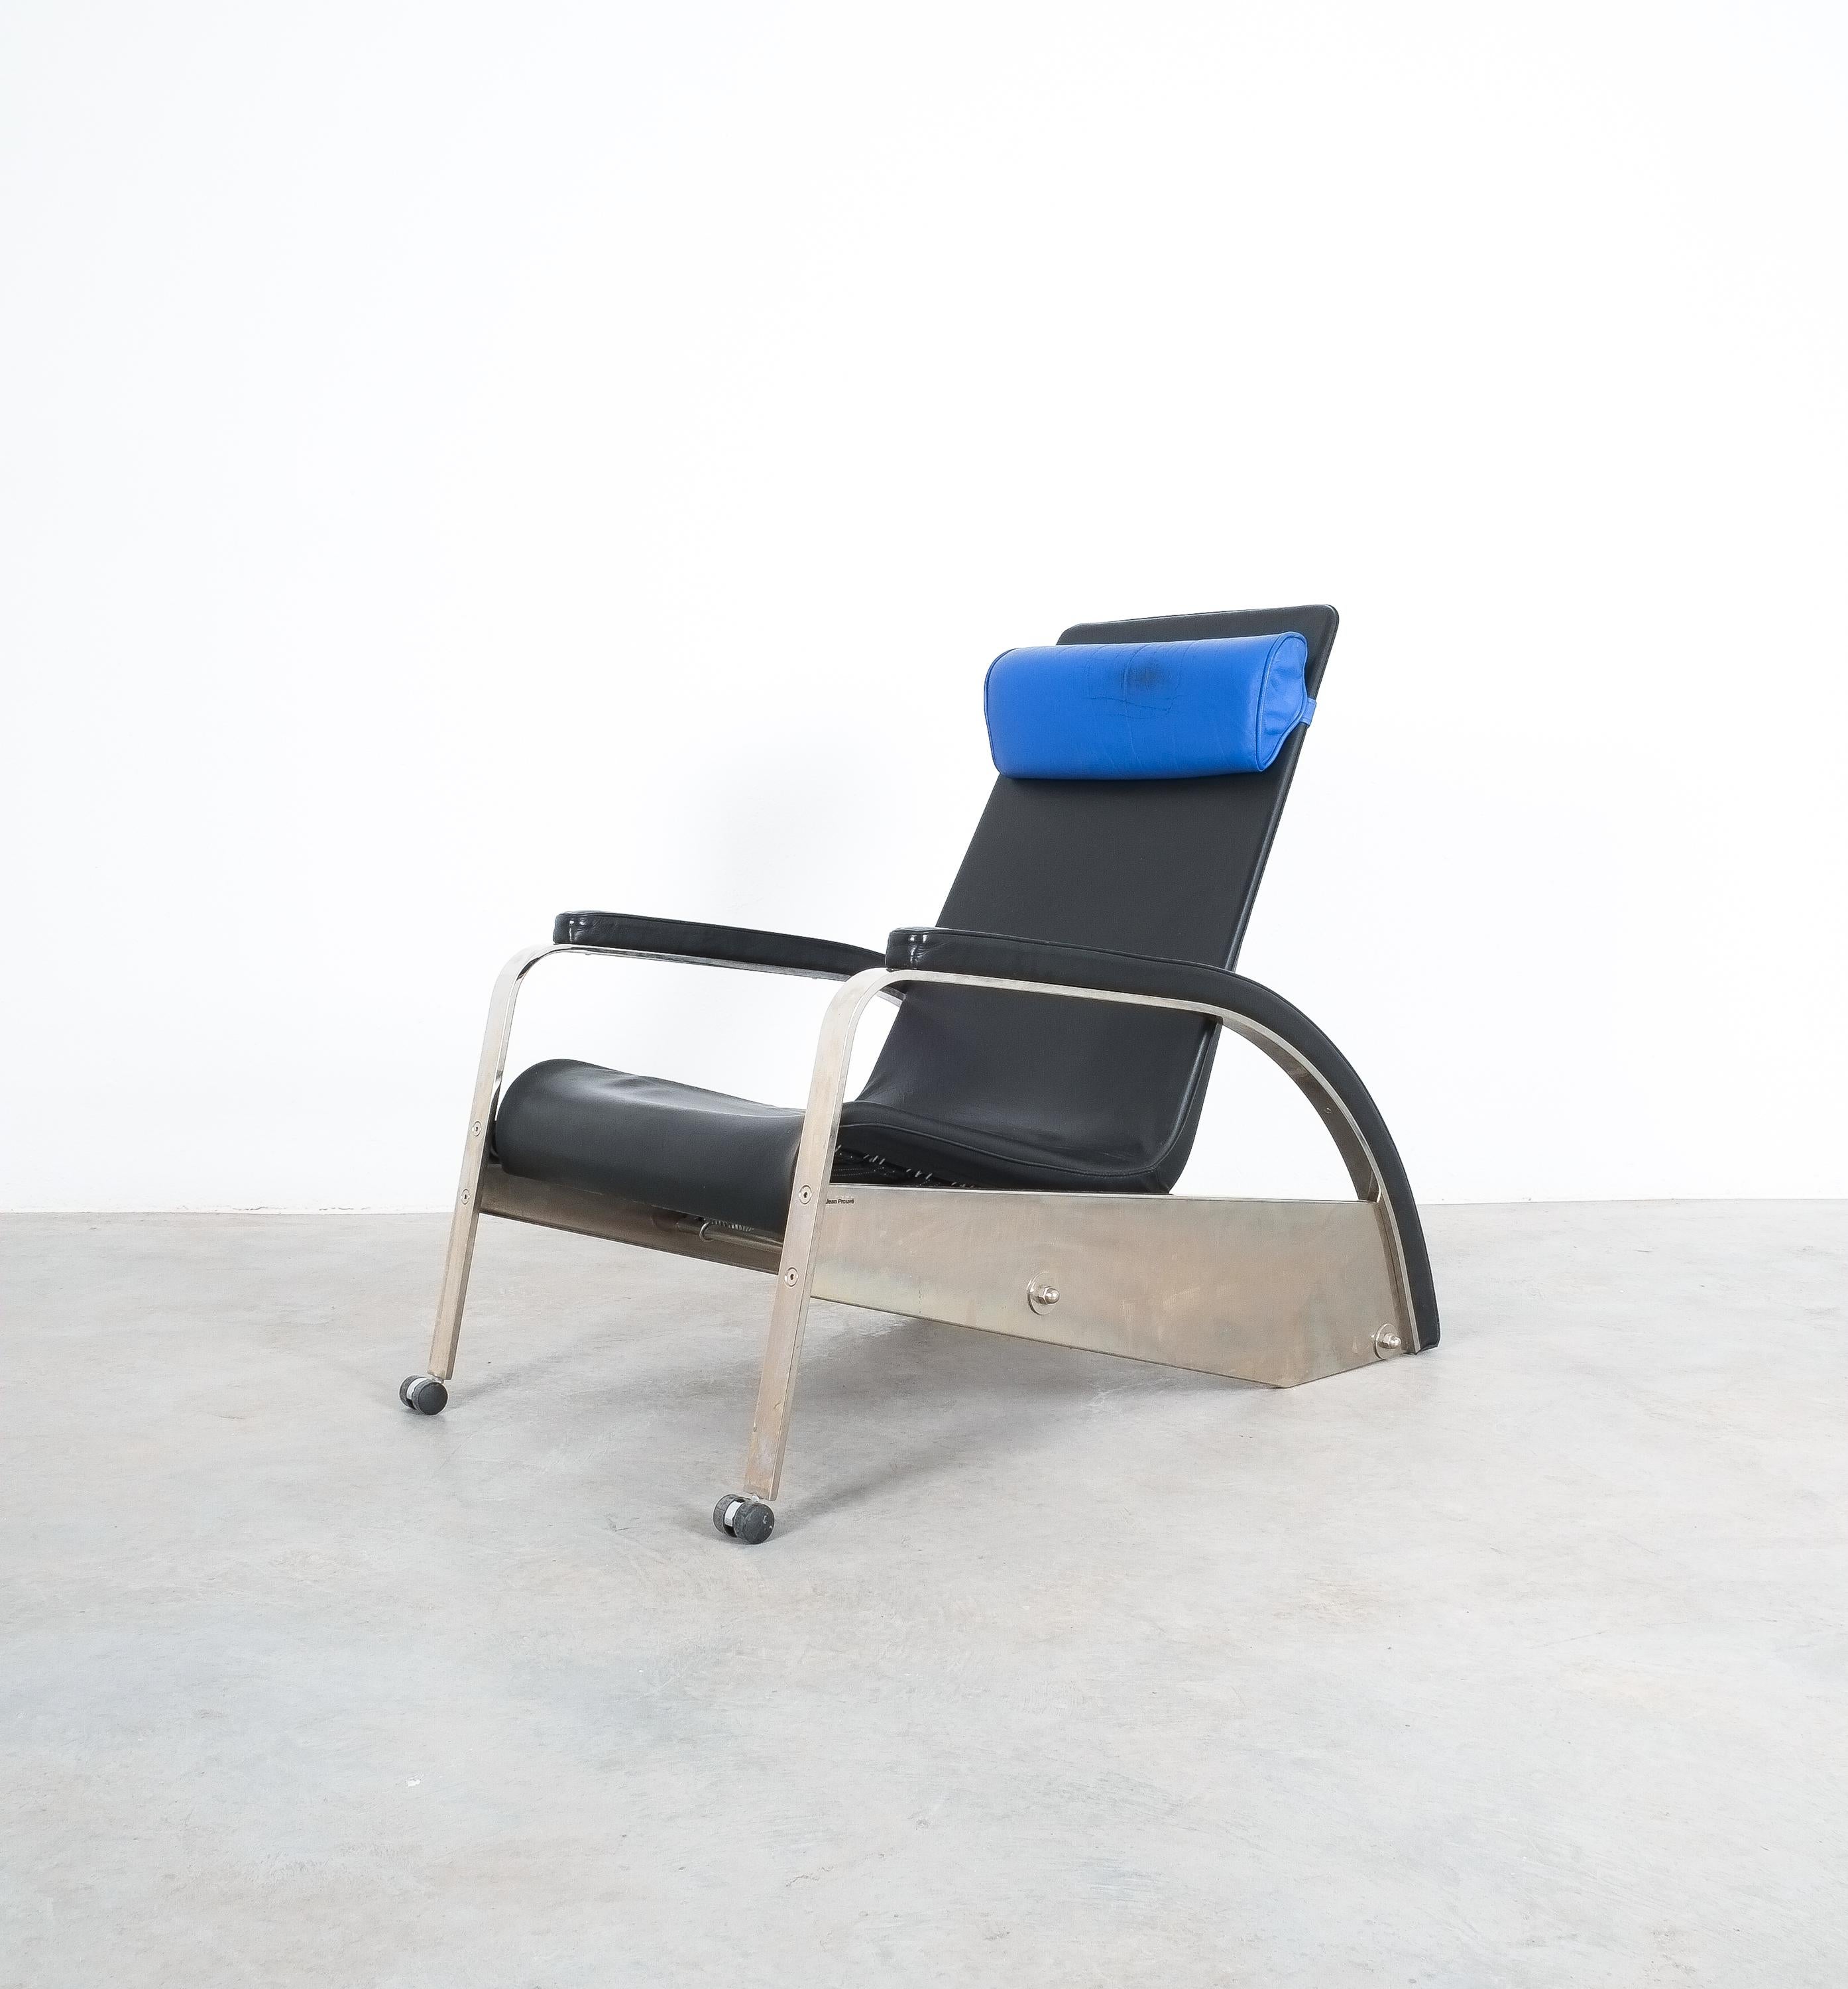 Very stylish, futuristic lounge chair by Jean Prouvé, design 1928-1930, production for Tecta circa 1985

currently this piece is on sale for $8900 instead of $11900

This legendary chair was produced in a limited number in the 1930's and only 3